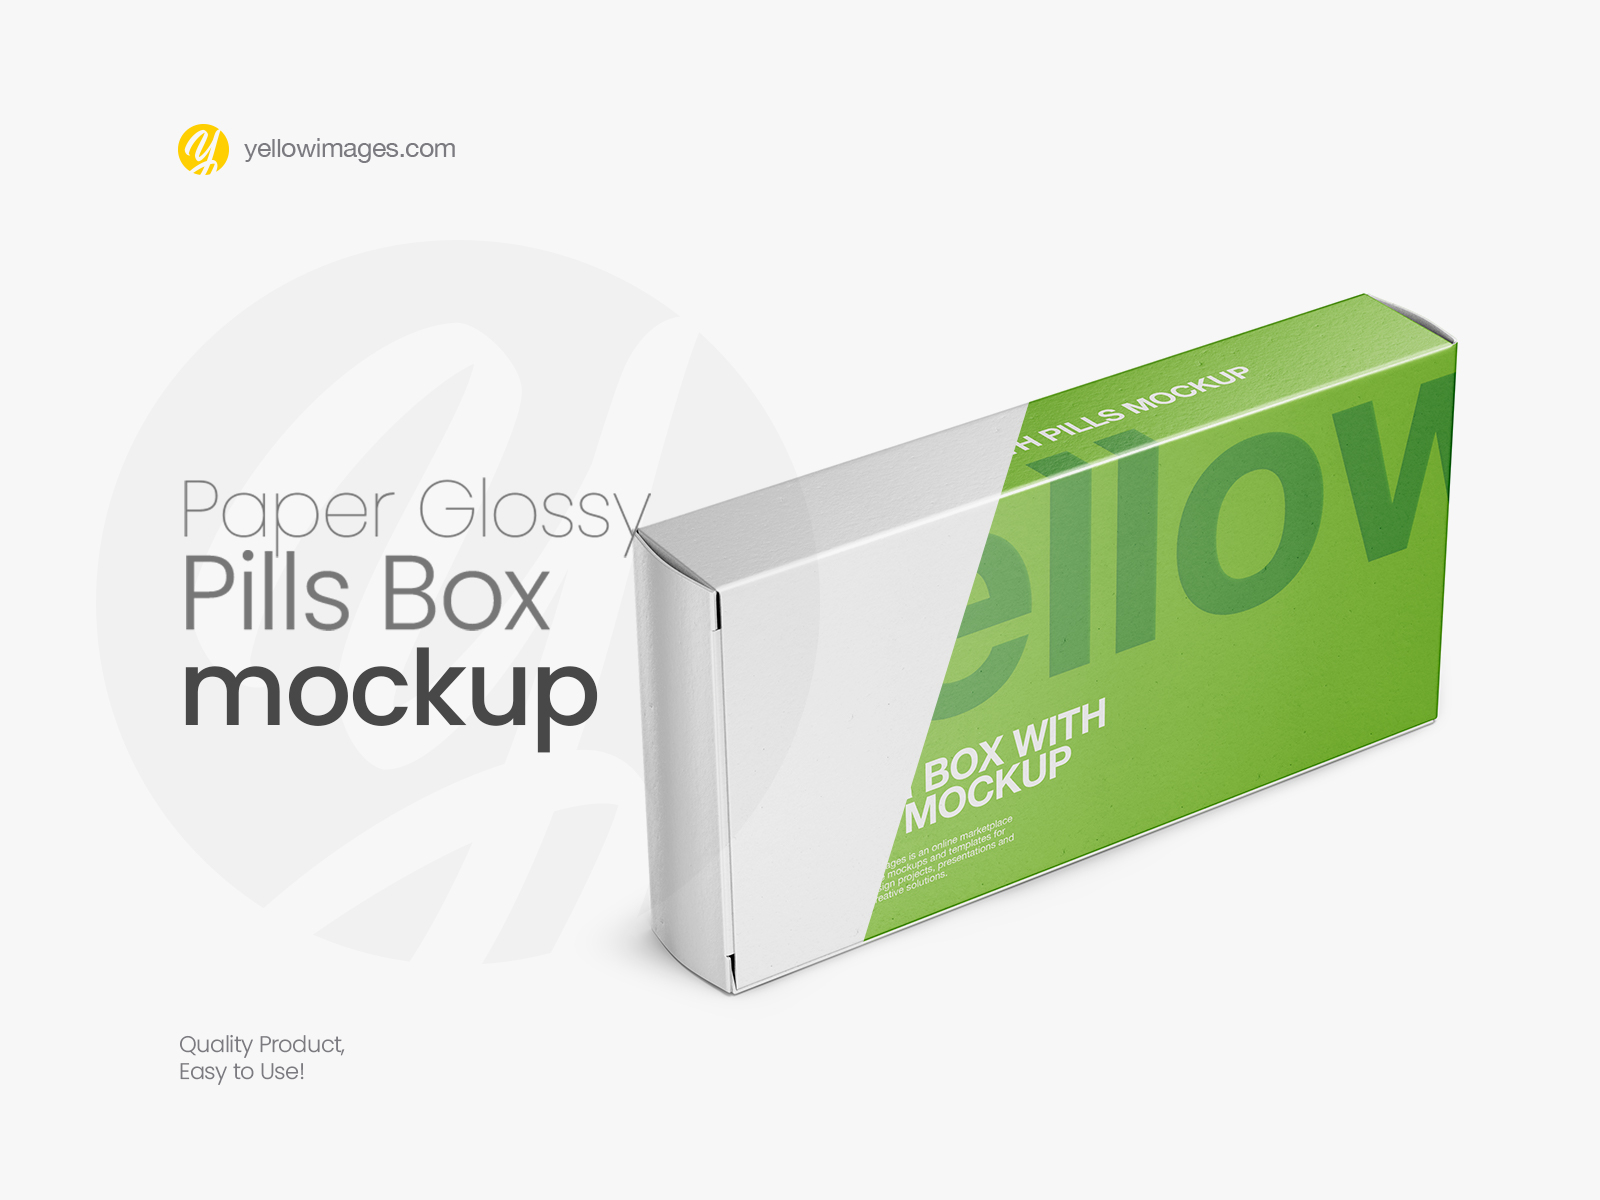 Download Free Mockup Overlay Apk Download Free And Premium Psd Mockup Templates And Design Assets SVG Cut Files